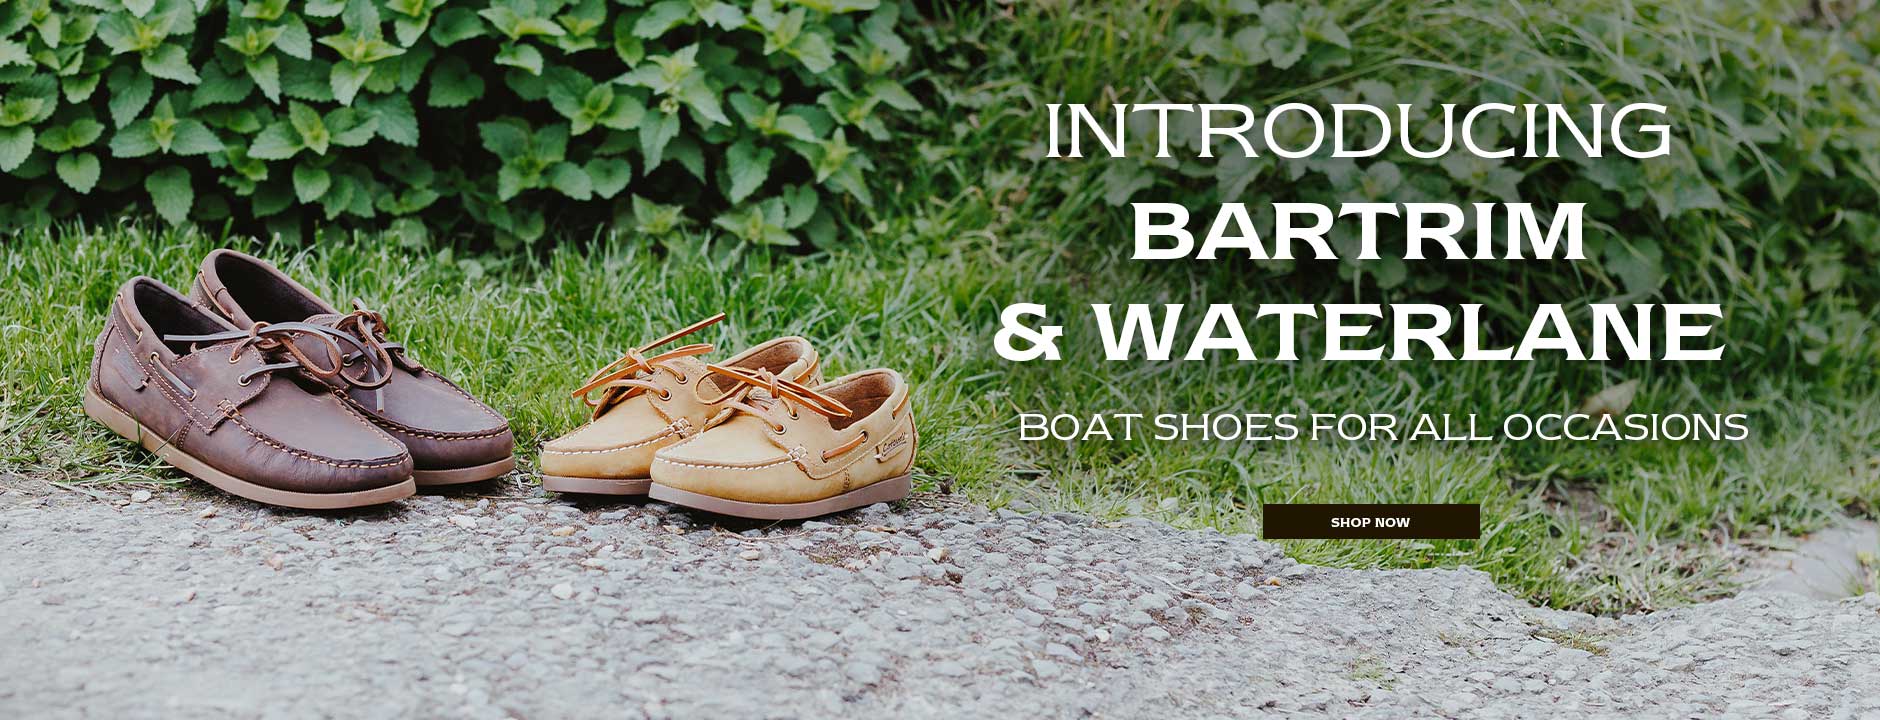 Brown and tan coloured Cotswold Bartrim & Waterlane boat shoes on a roadside with nettles behind. Text reads 'INTRODUCING BARTRIM & WATERLANE. BOAT SHOES FOR ALL OCCASIONS. SHOP NOW'